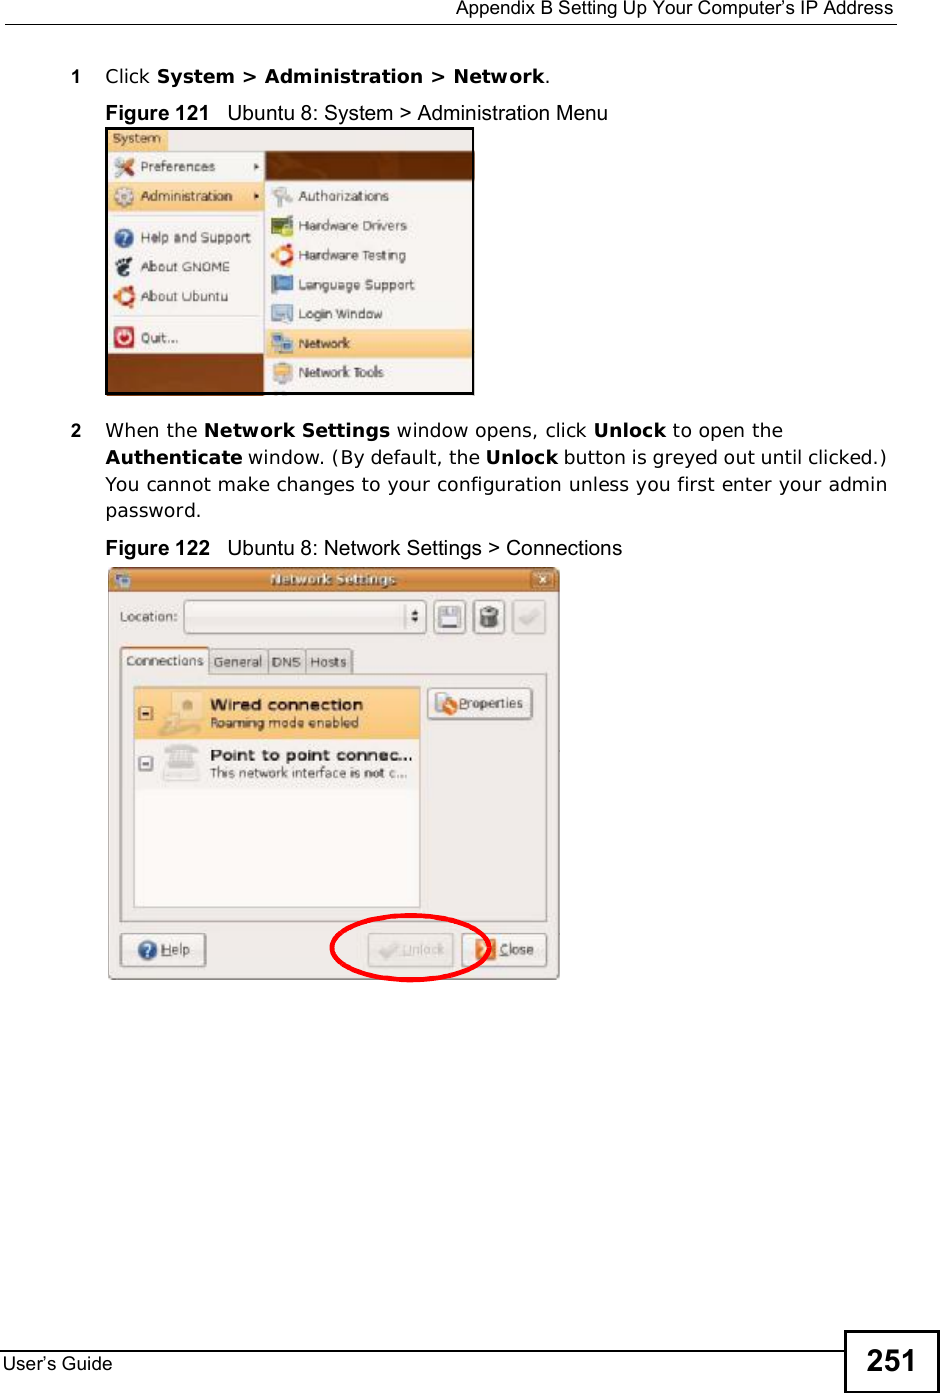  Appendix BSetting Up Your Computer s IP AddressUser s Guide 2511Click System &gt; Administration &gt; Network.Figure 121   Ubuntu 8: System &gt; Administration Menu2When the Network Settings window opens, click Unlock to open the Authenticate window. (By default, the Unlock button is greyed out until clicked.) You cannot make changes to your configuration unless you first enter your admin password.Figure 122   Ubuntu 8: Network Settings &gt; Connections